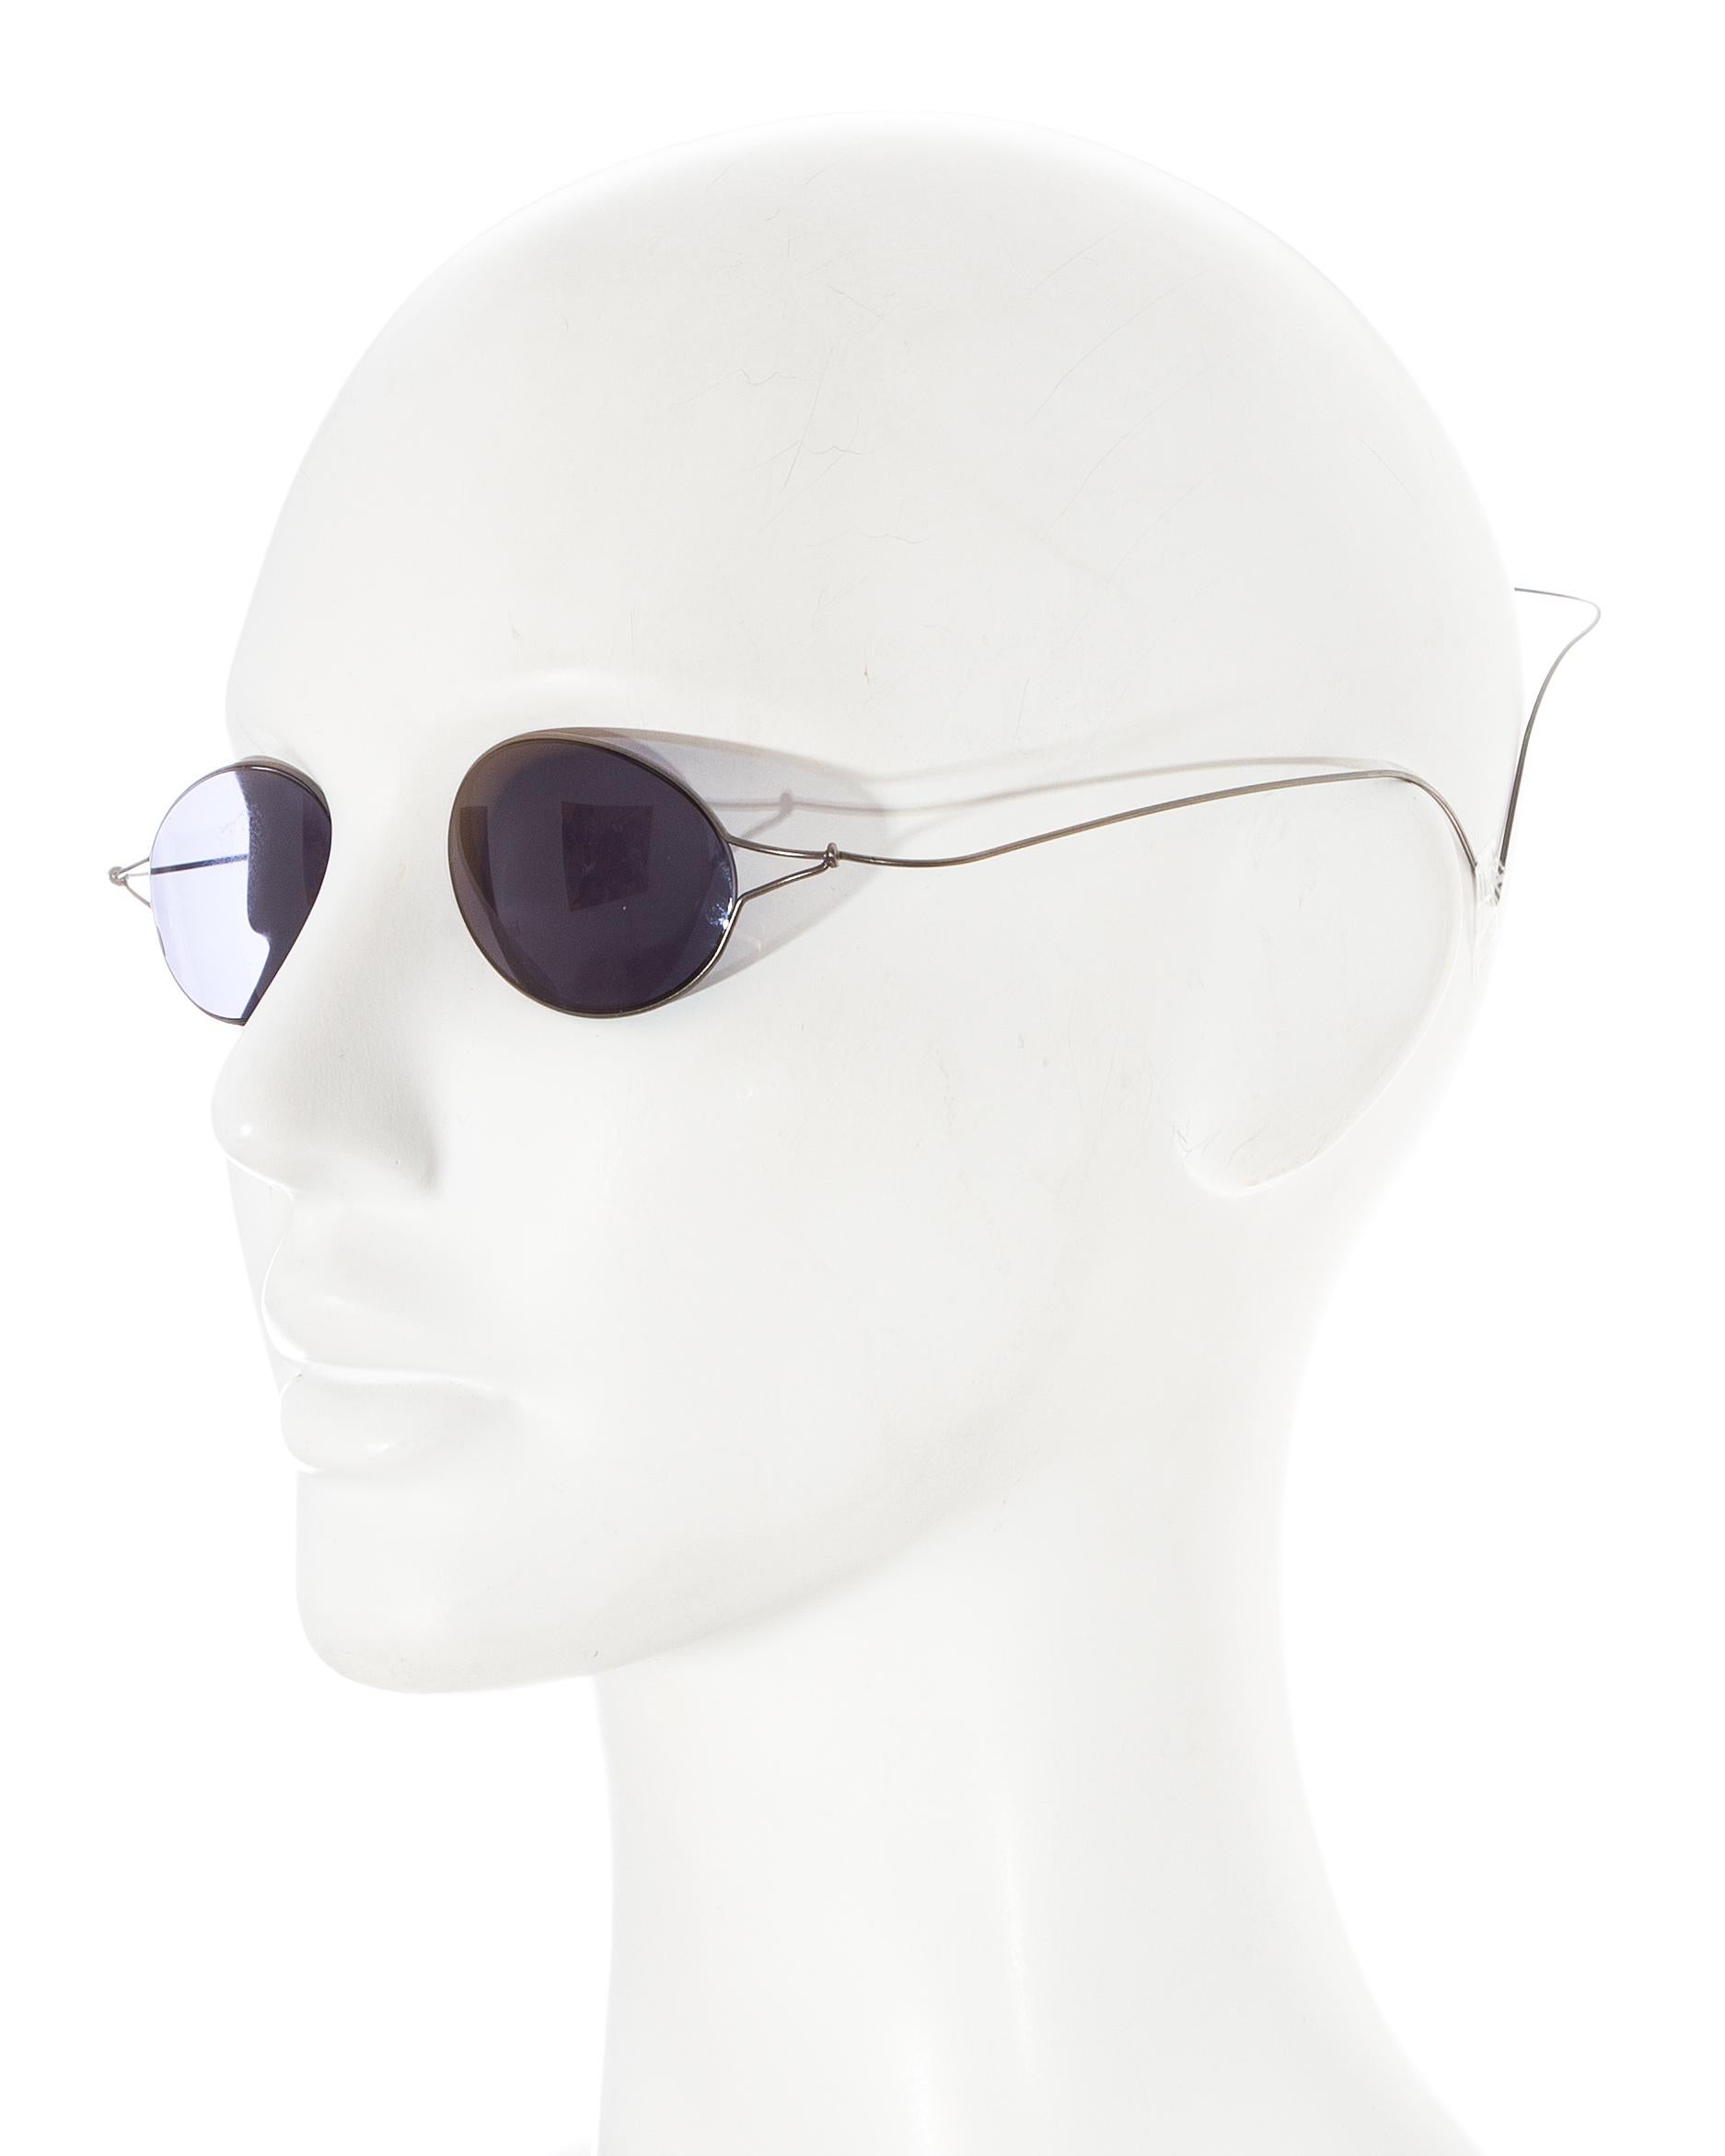 Chanel by Karl Lagerfeld; 'Double Monocle' sunglasses for sunbathing. Feather light, the wrap-around wire arms hug the head. Black monocle style lenses. 

'Some remain skeptical as to whether these groundbreaking sunglasses will really stay in place